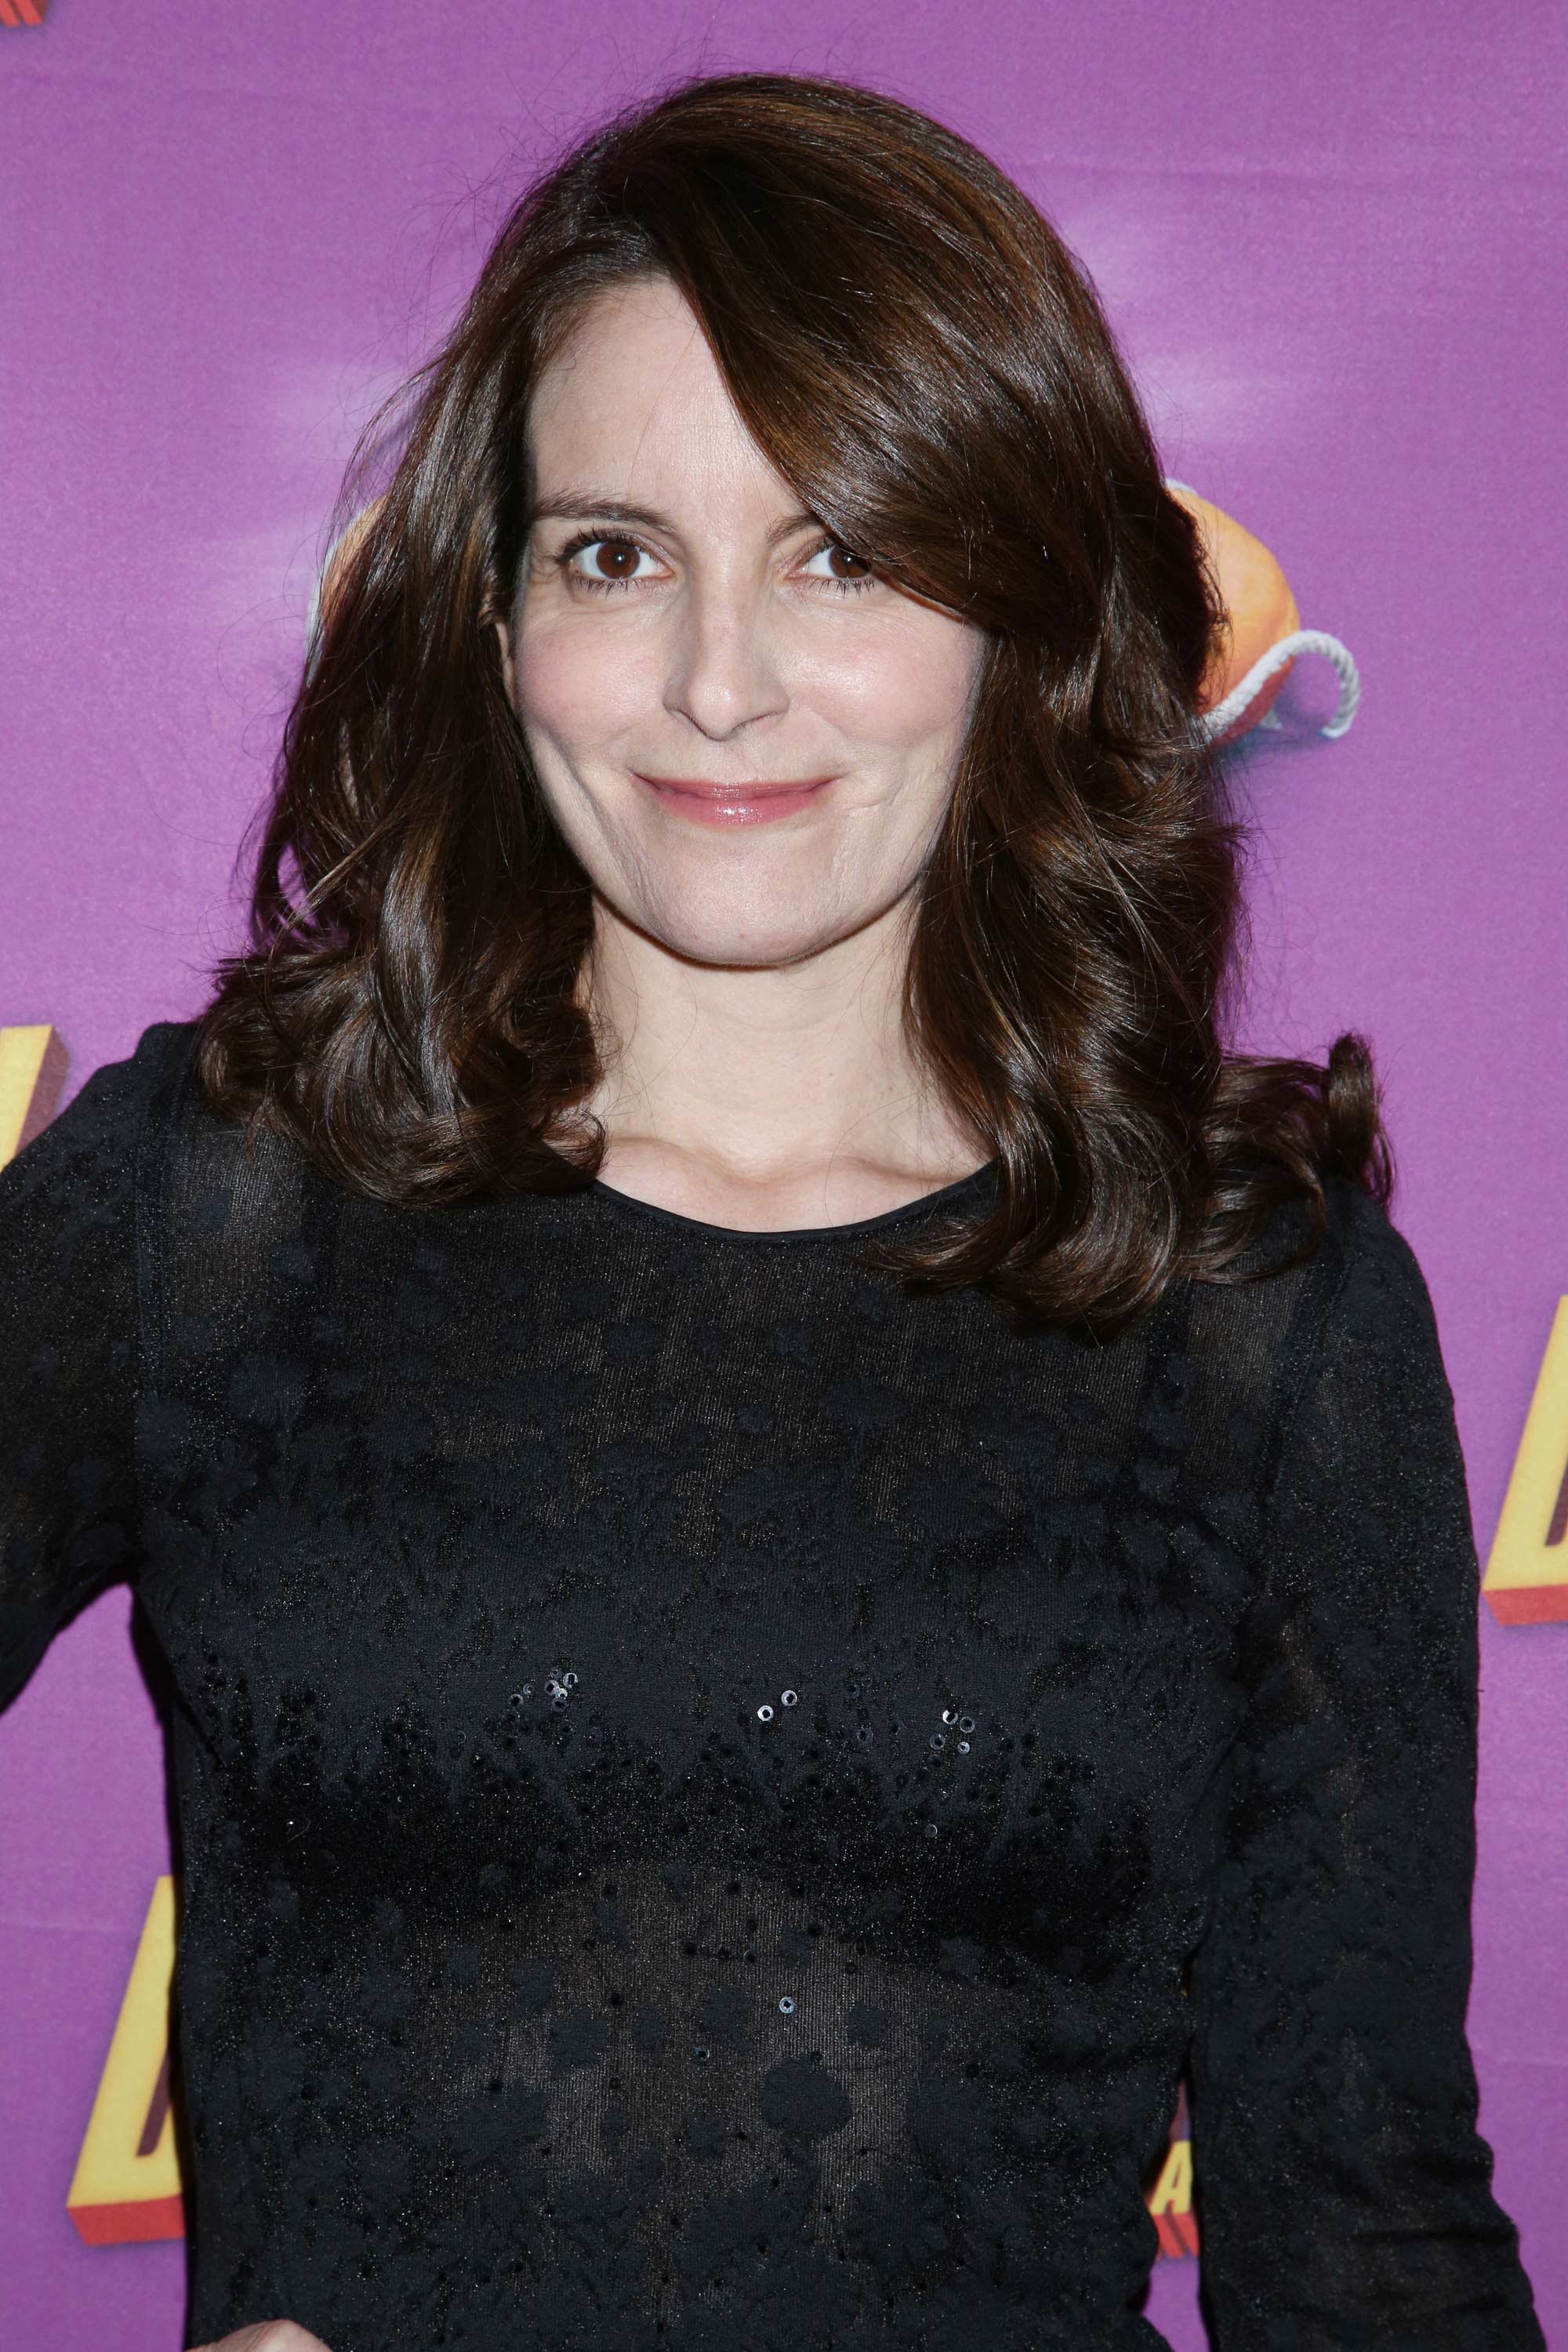 Tina Fey at the opening night performance of Disaster